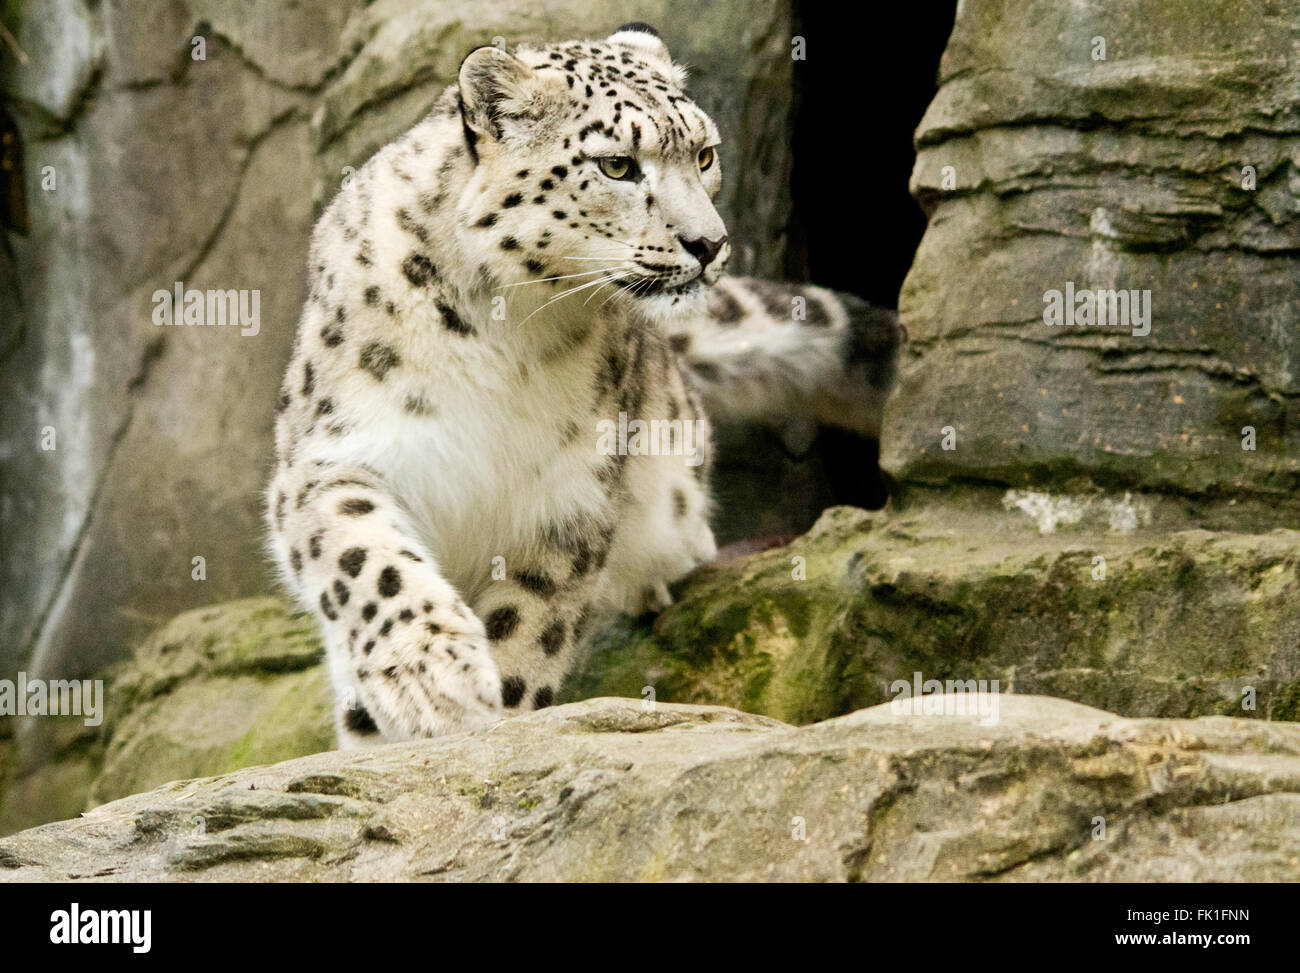 Snow leopard leaving den. Captive animal enclosure at Marwell zoo. Taken from below  in landscape format. Conservation breeding. Had recent new cubs. Stock Photo